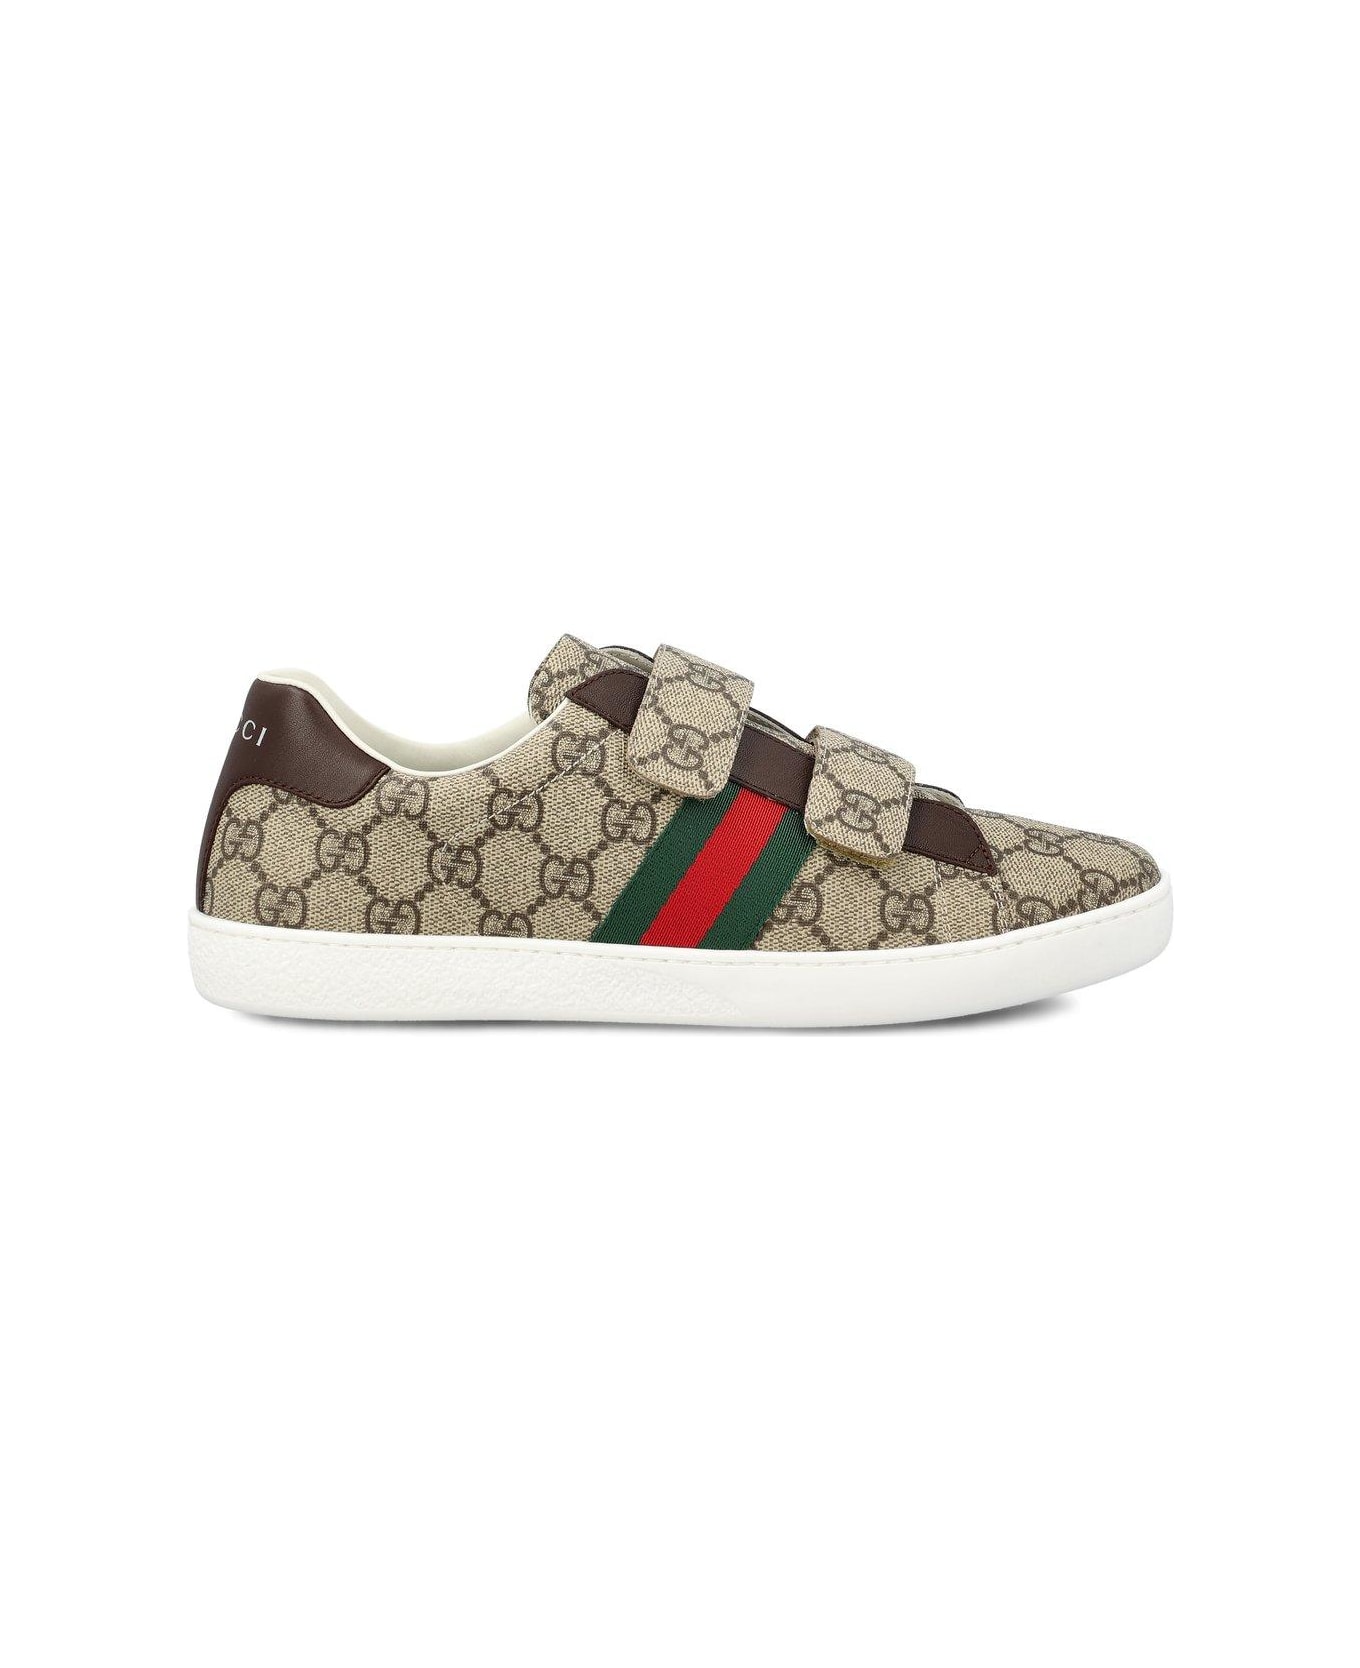 Gucci Ace Logo Printed Sneakers - BEIGE